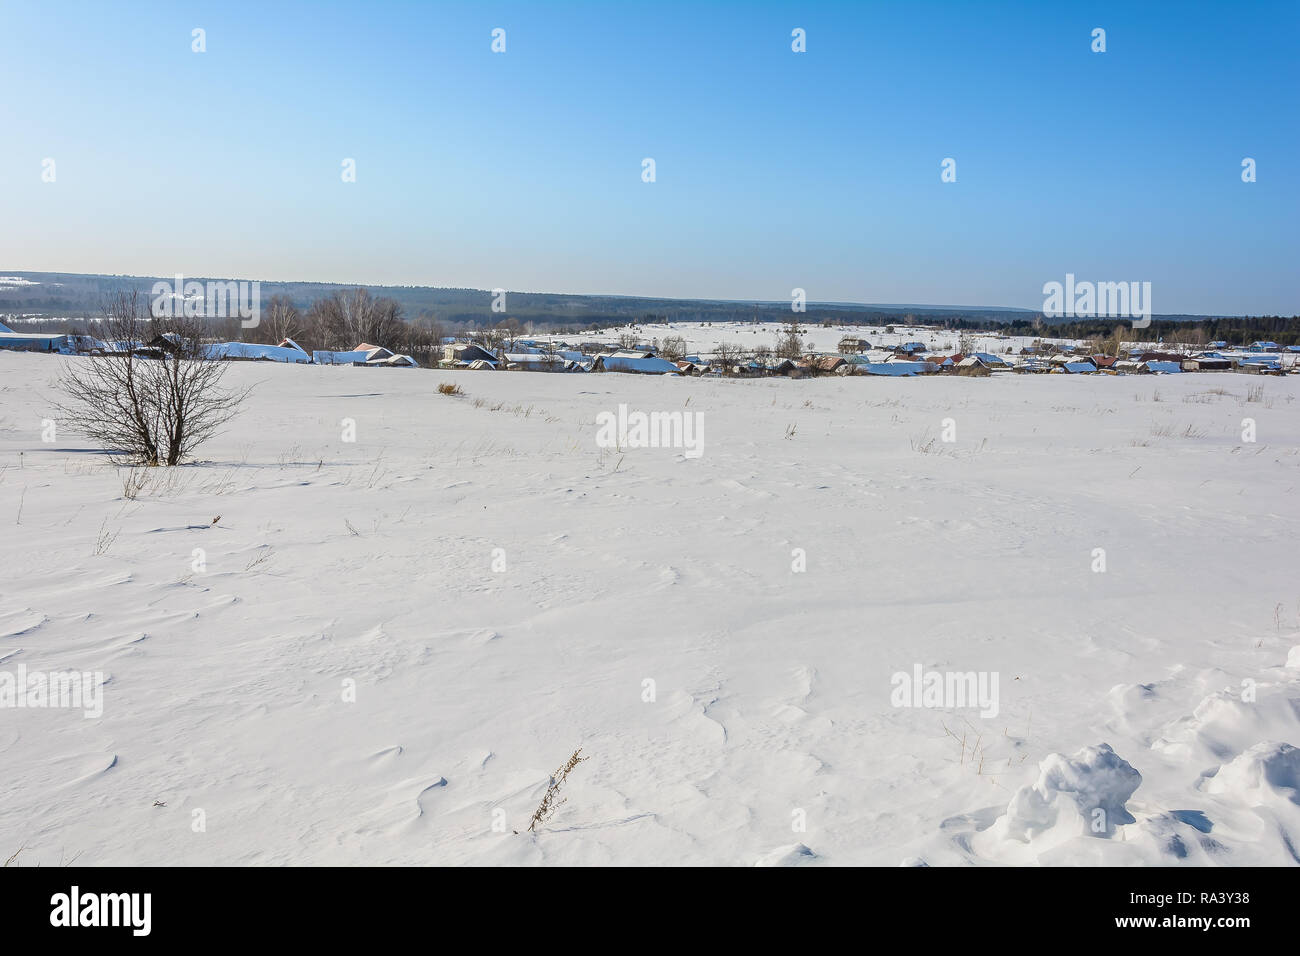 Snow-covered village near the field in winter Stock Photo